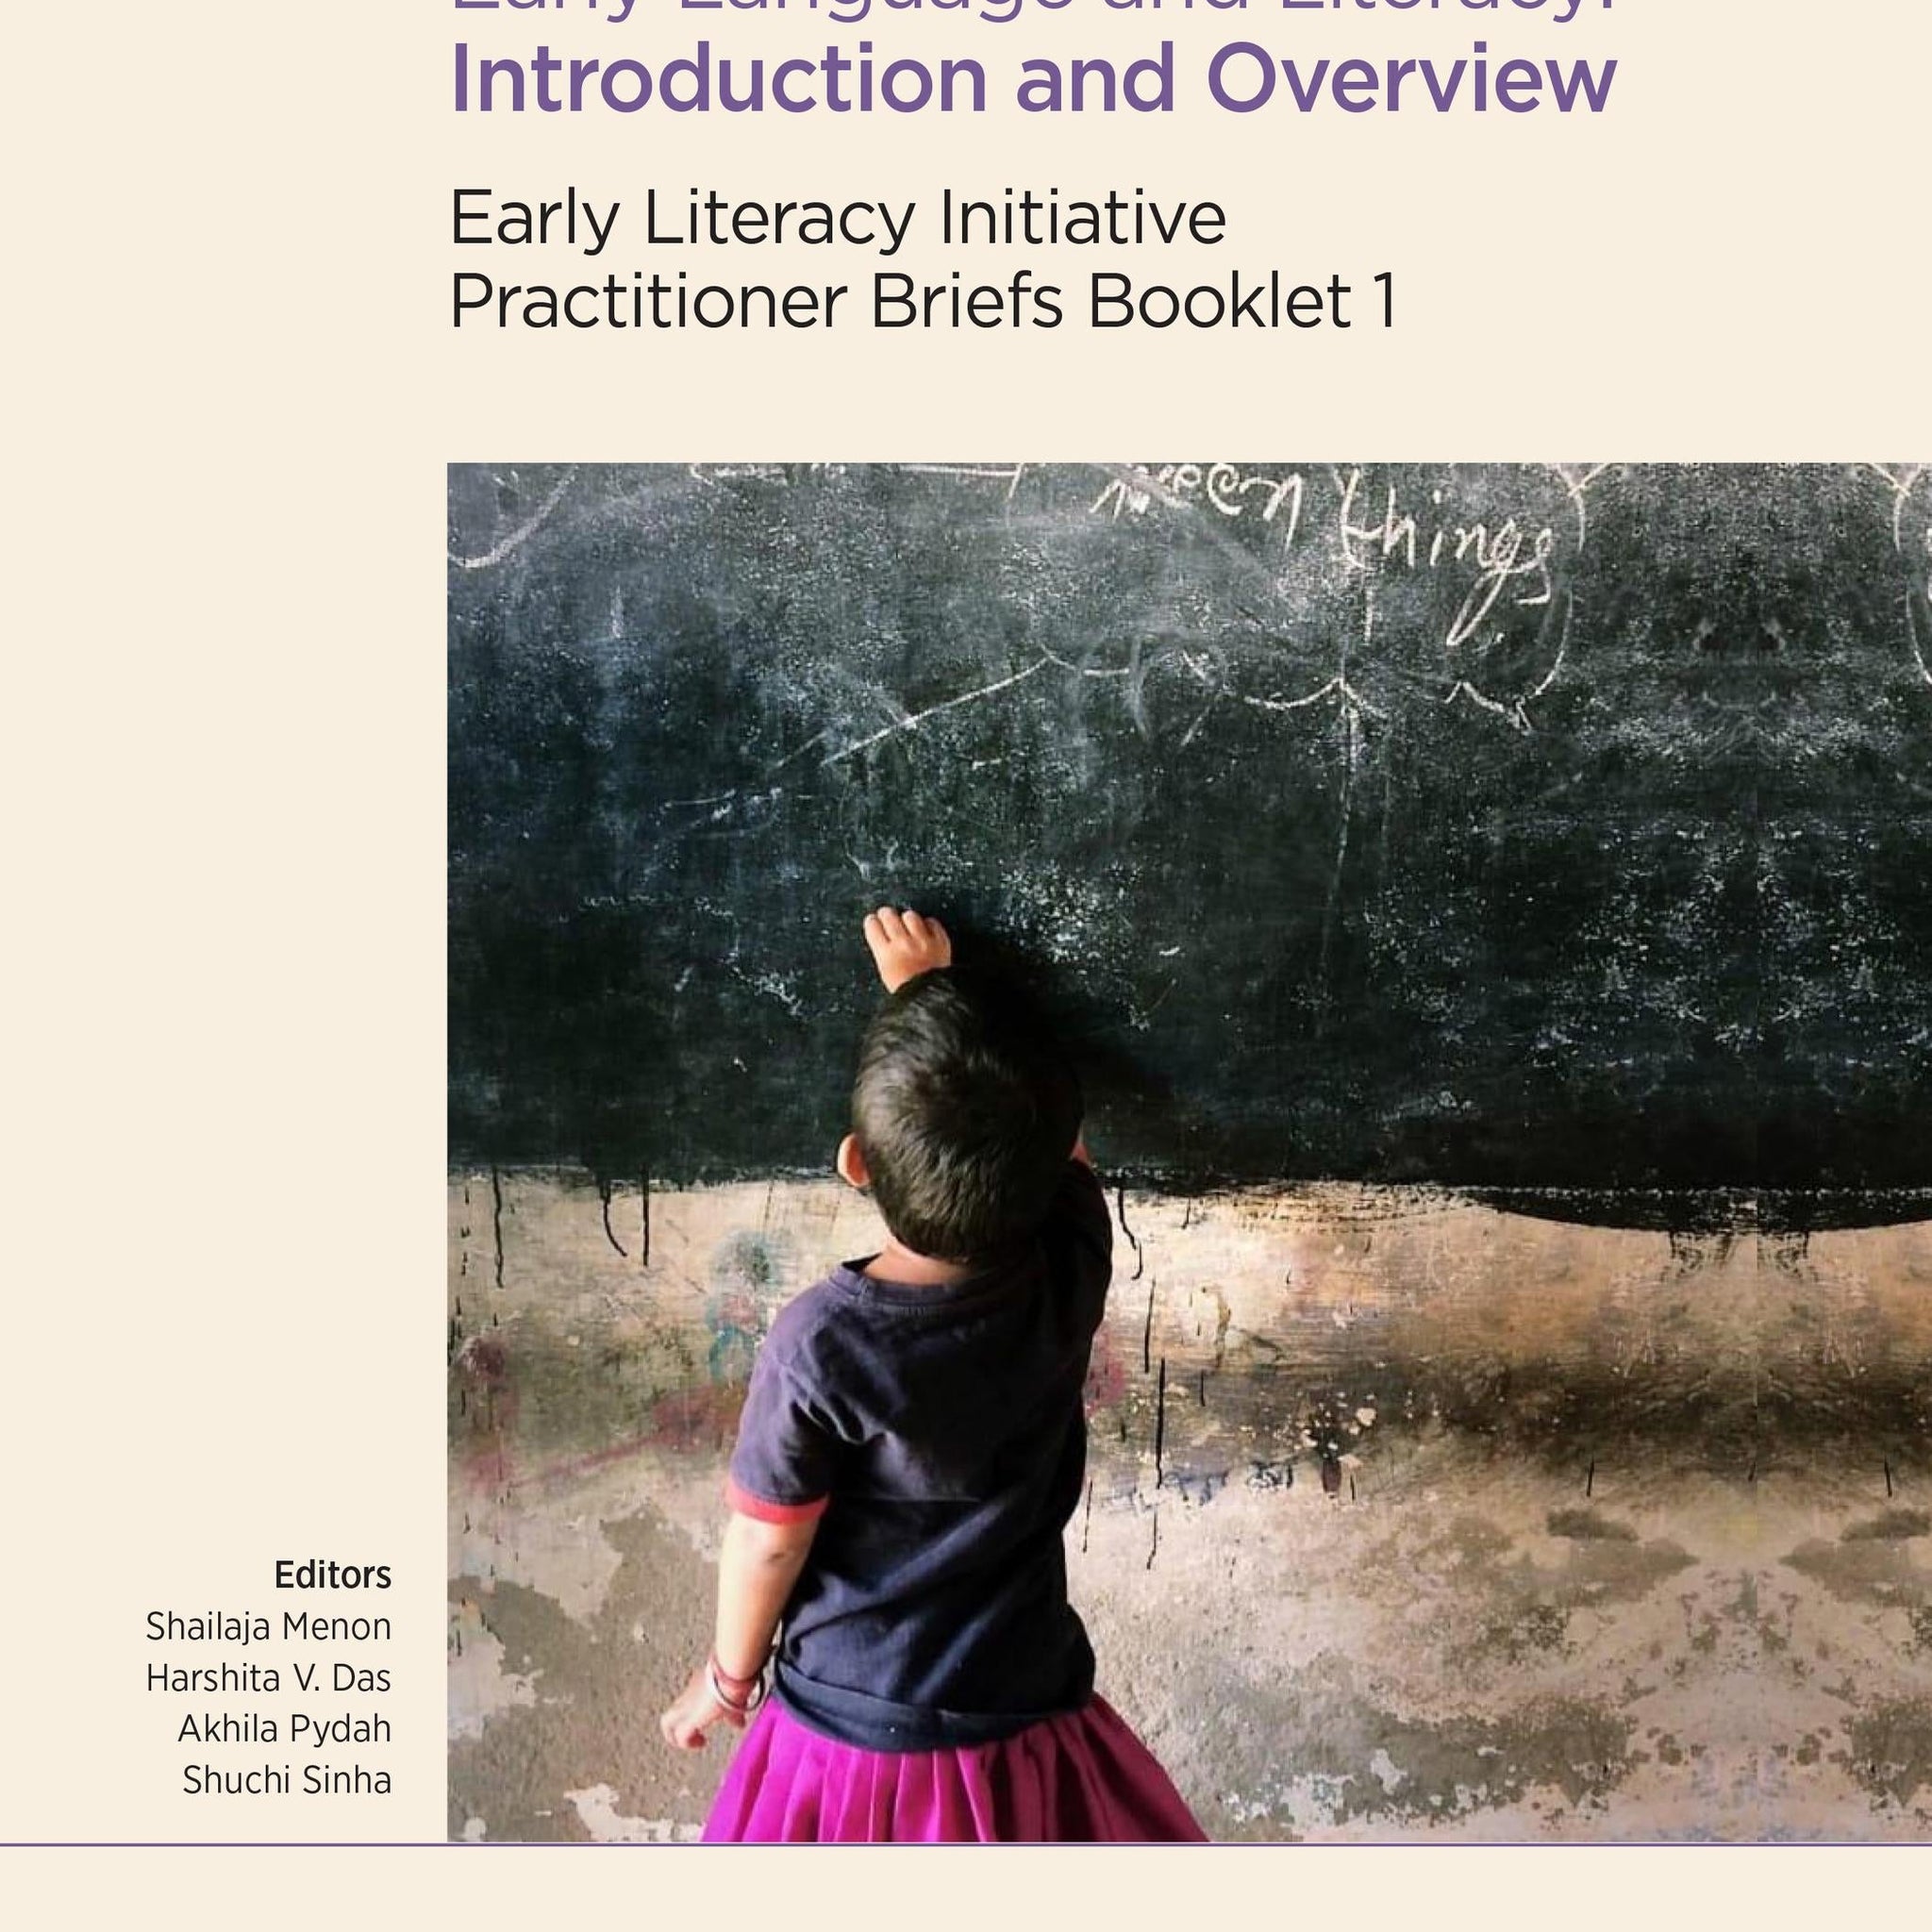 Early Language and Literacy : Introduction and Overview (Booklet 1)